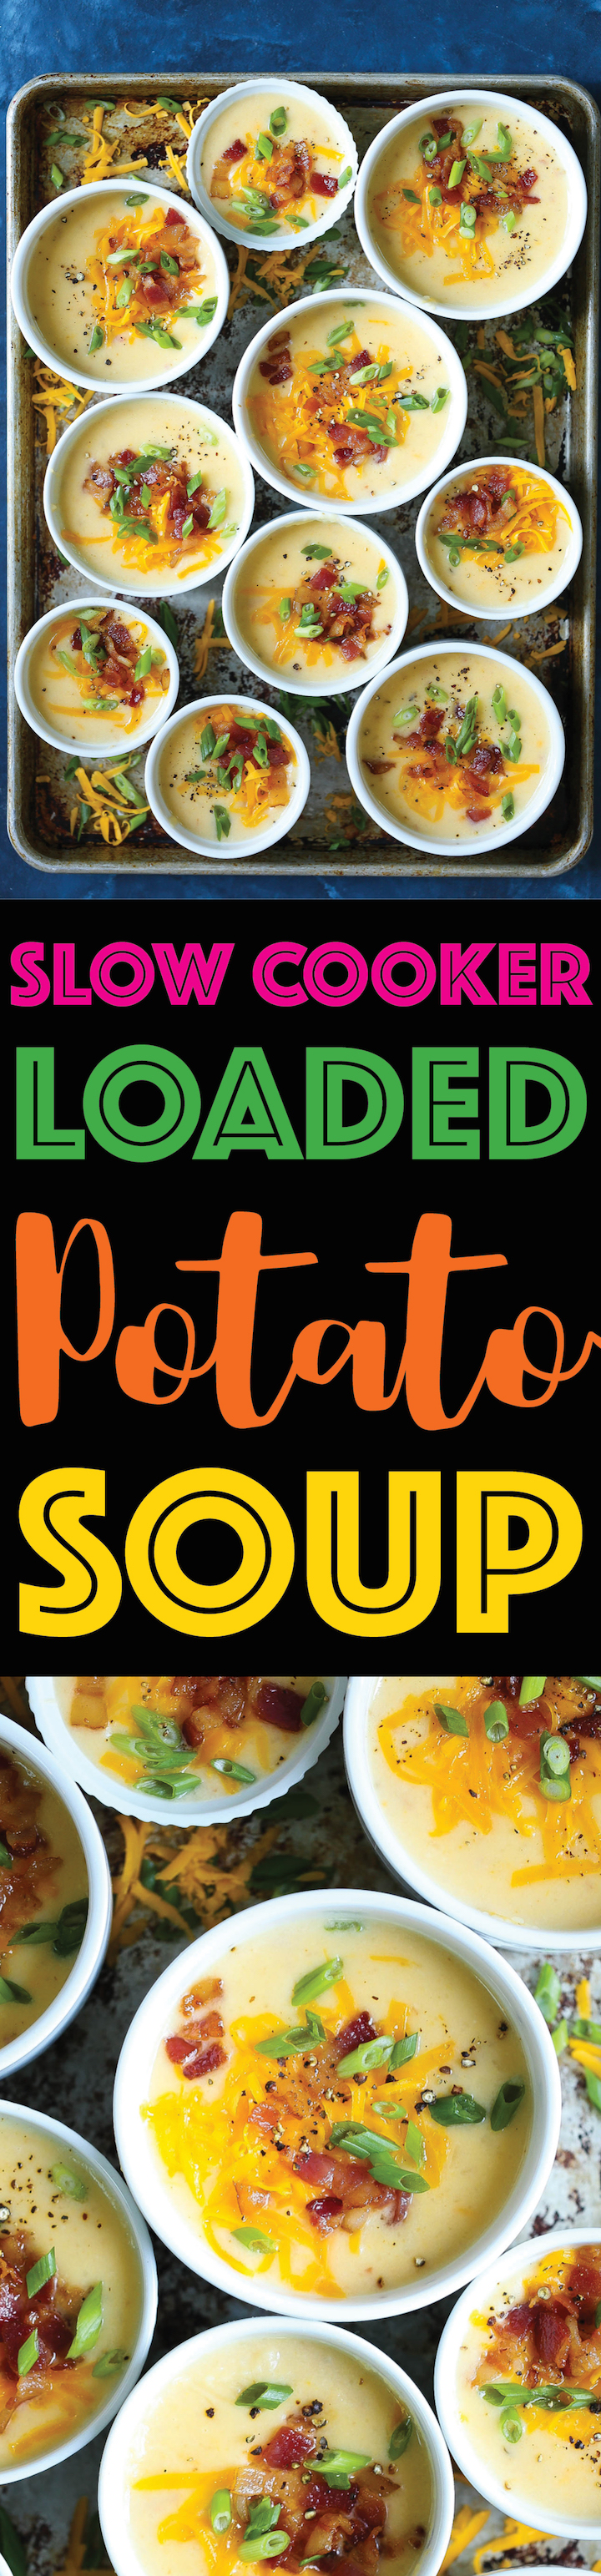 Slow Cooker Loaded Potato Soup - Everyone's favorite comfort food soup in crockpot form! Hands-off and incredibly easy with 15 min prep work! That's it!